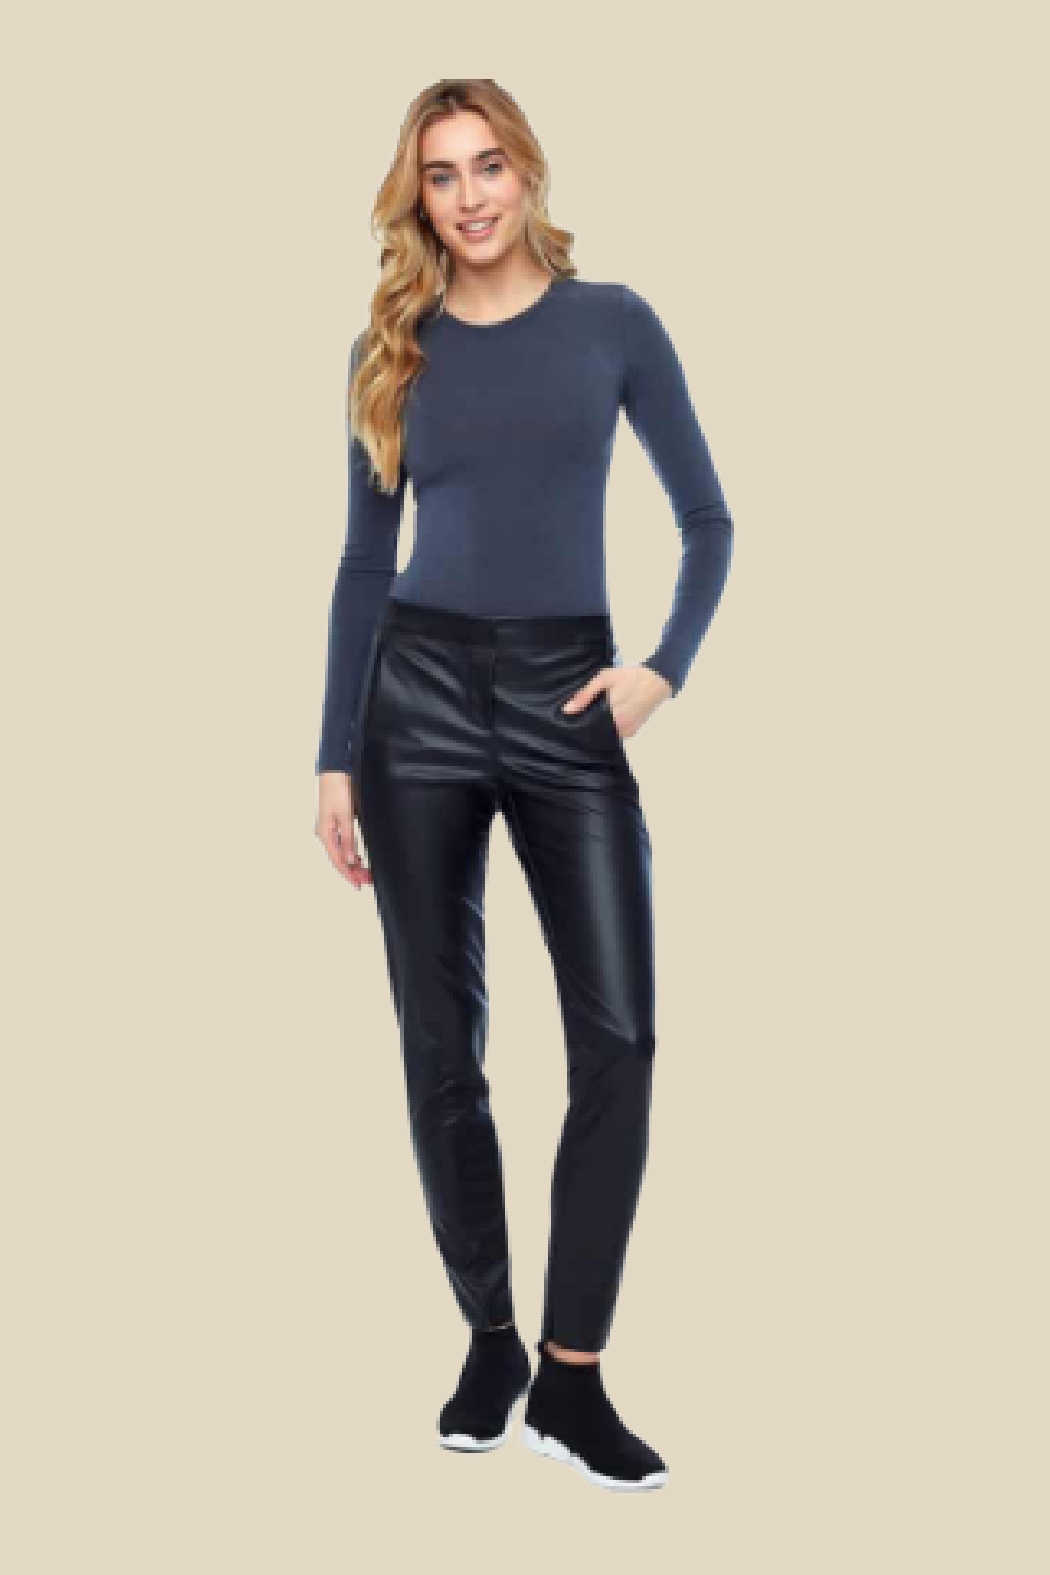 plus size alt outfit with leather leggings｜TikTok Search